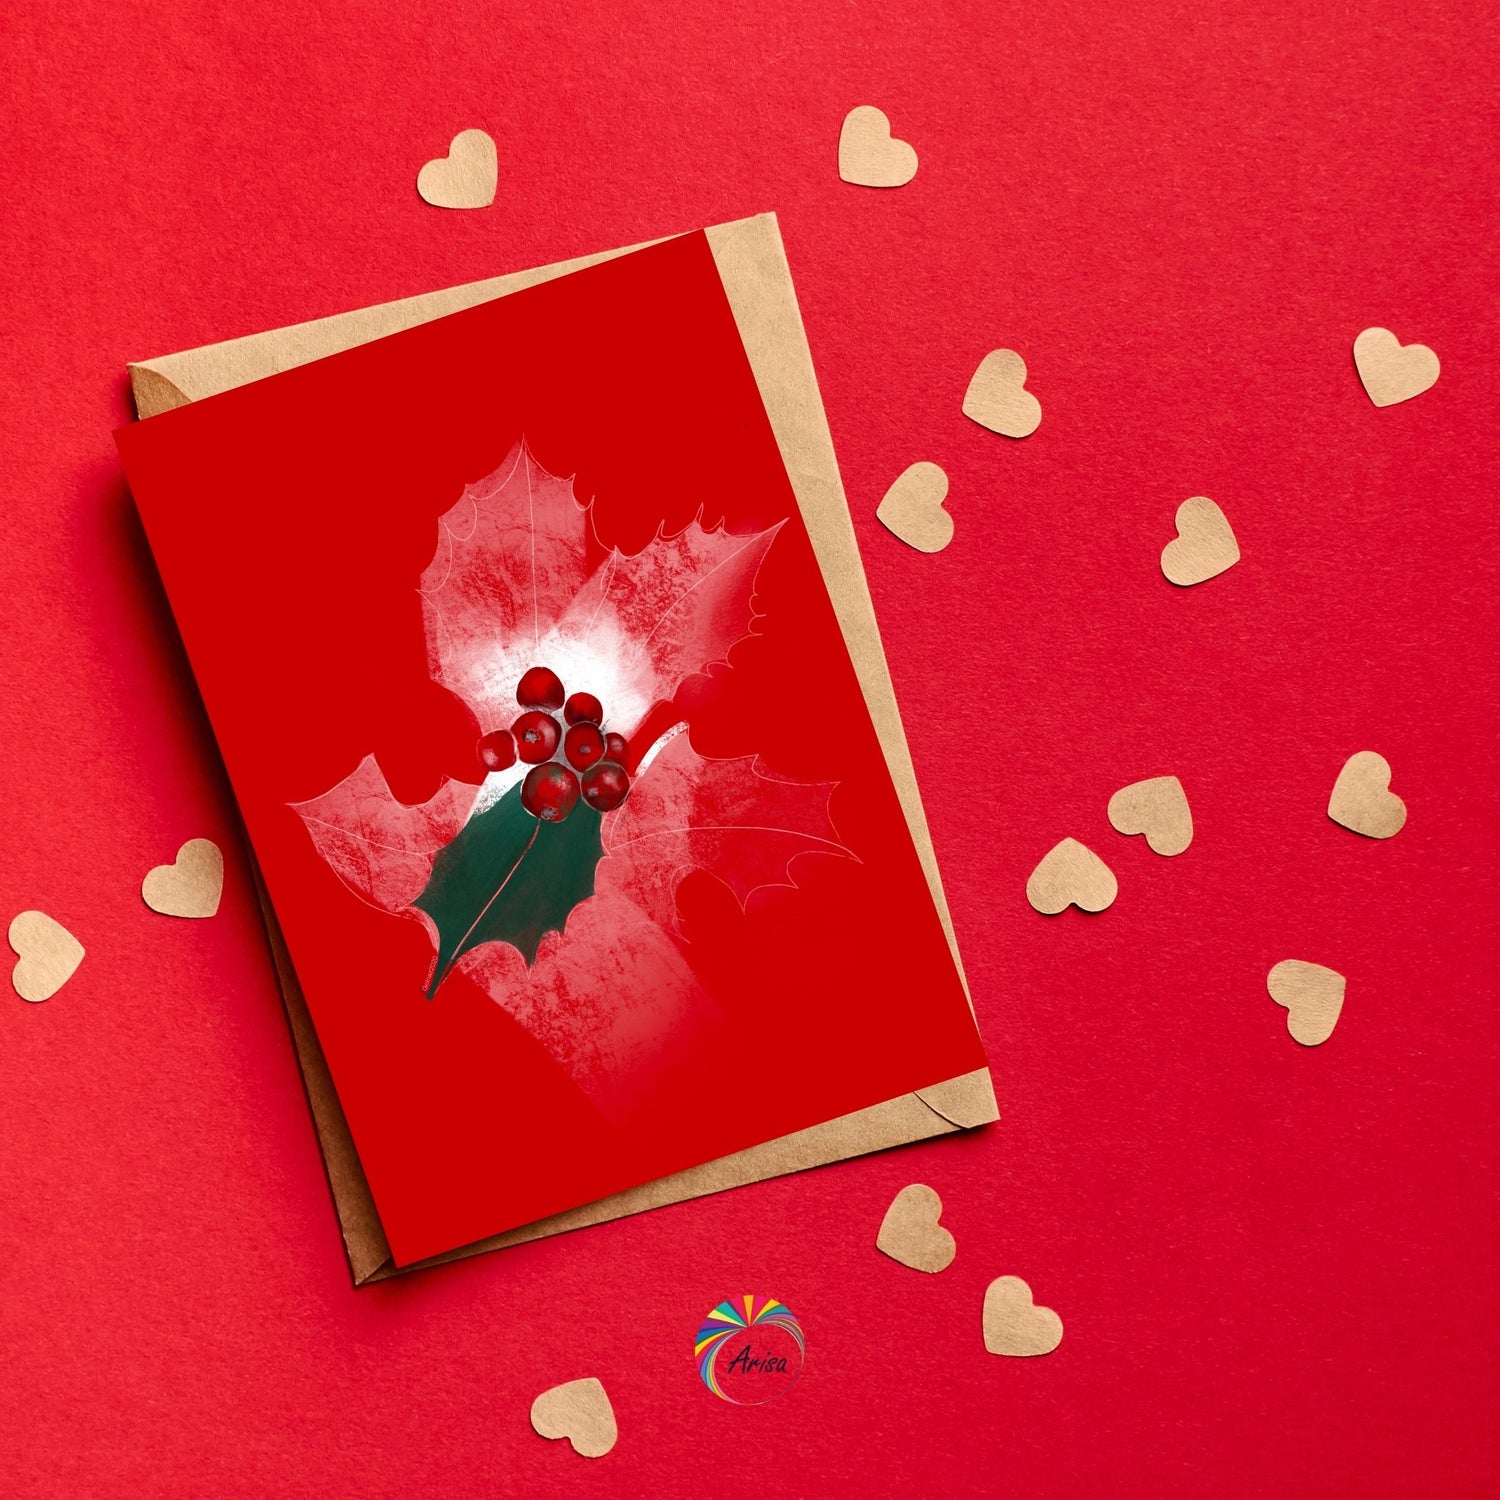 "Holly" Greeting Card by ArisaTeam surrounded by small hearts in a red background ideal as a Valentine card.